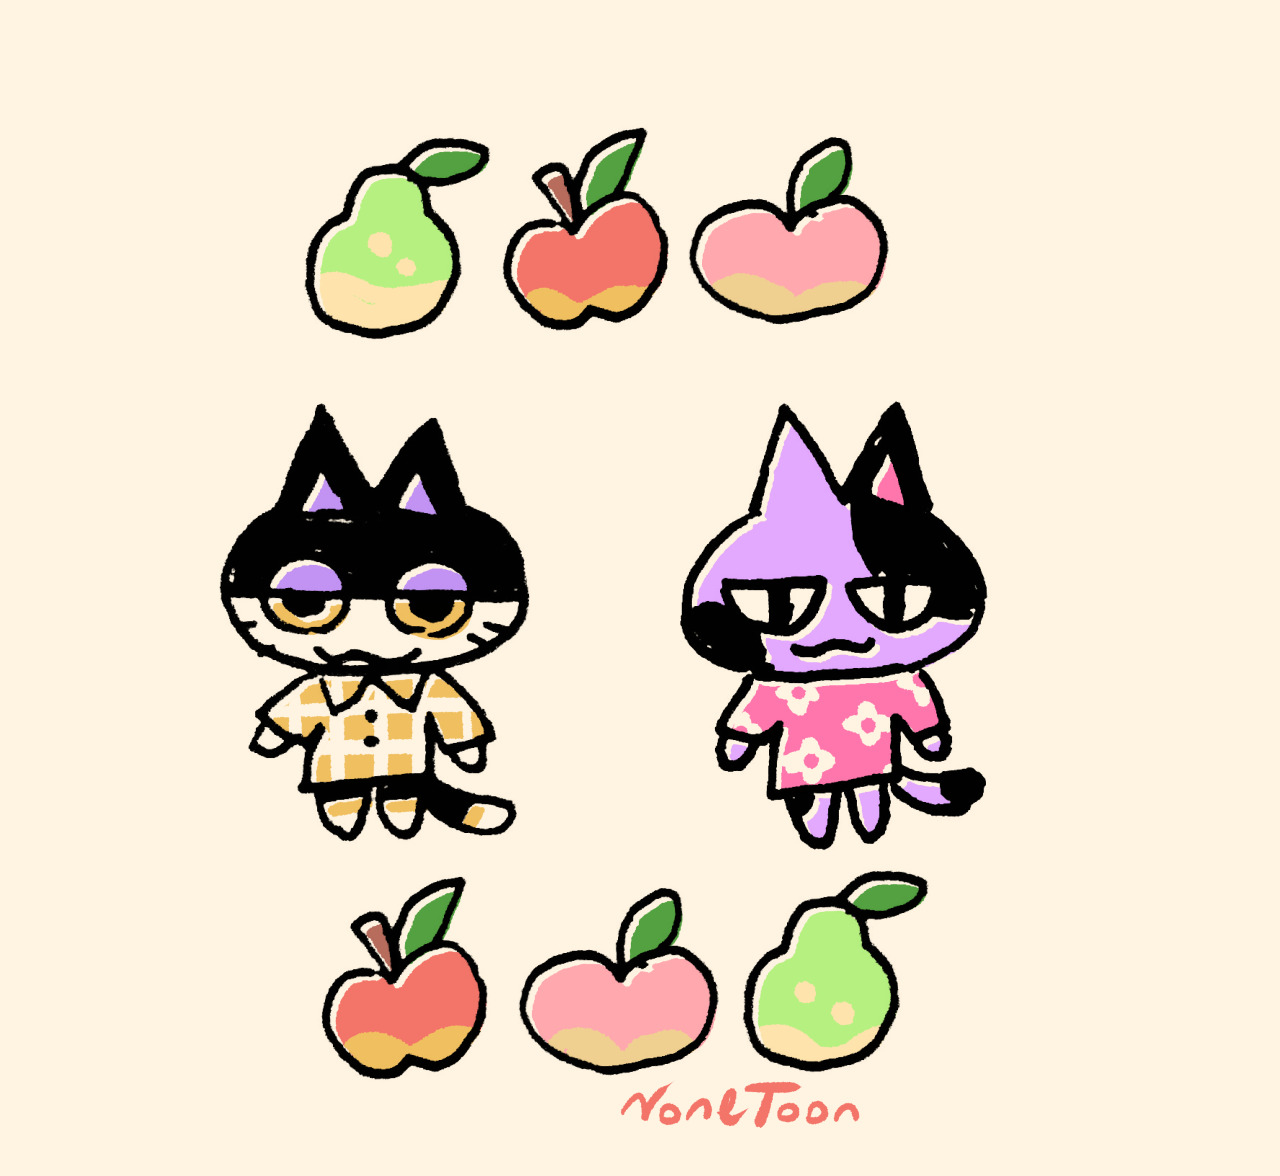 Lazy bros Punchy and Bob w/ fruit for decoration